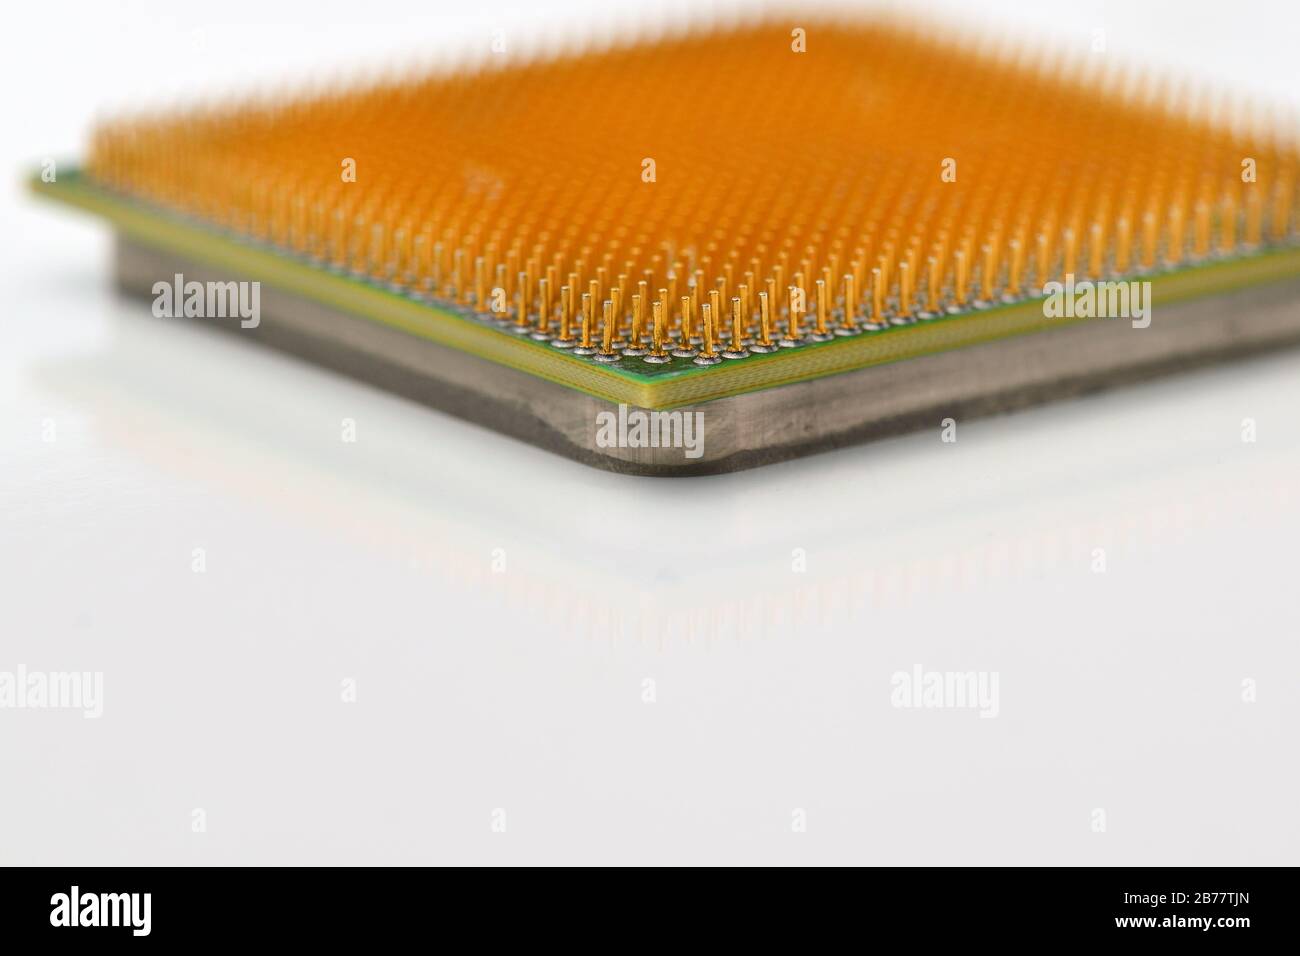 Central processor unit. Golden pins of a core. Copy space. Shallow depth of field. CPU. White background. Upside-down. Stock Photo